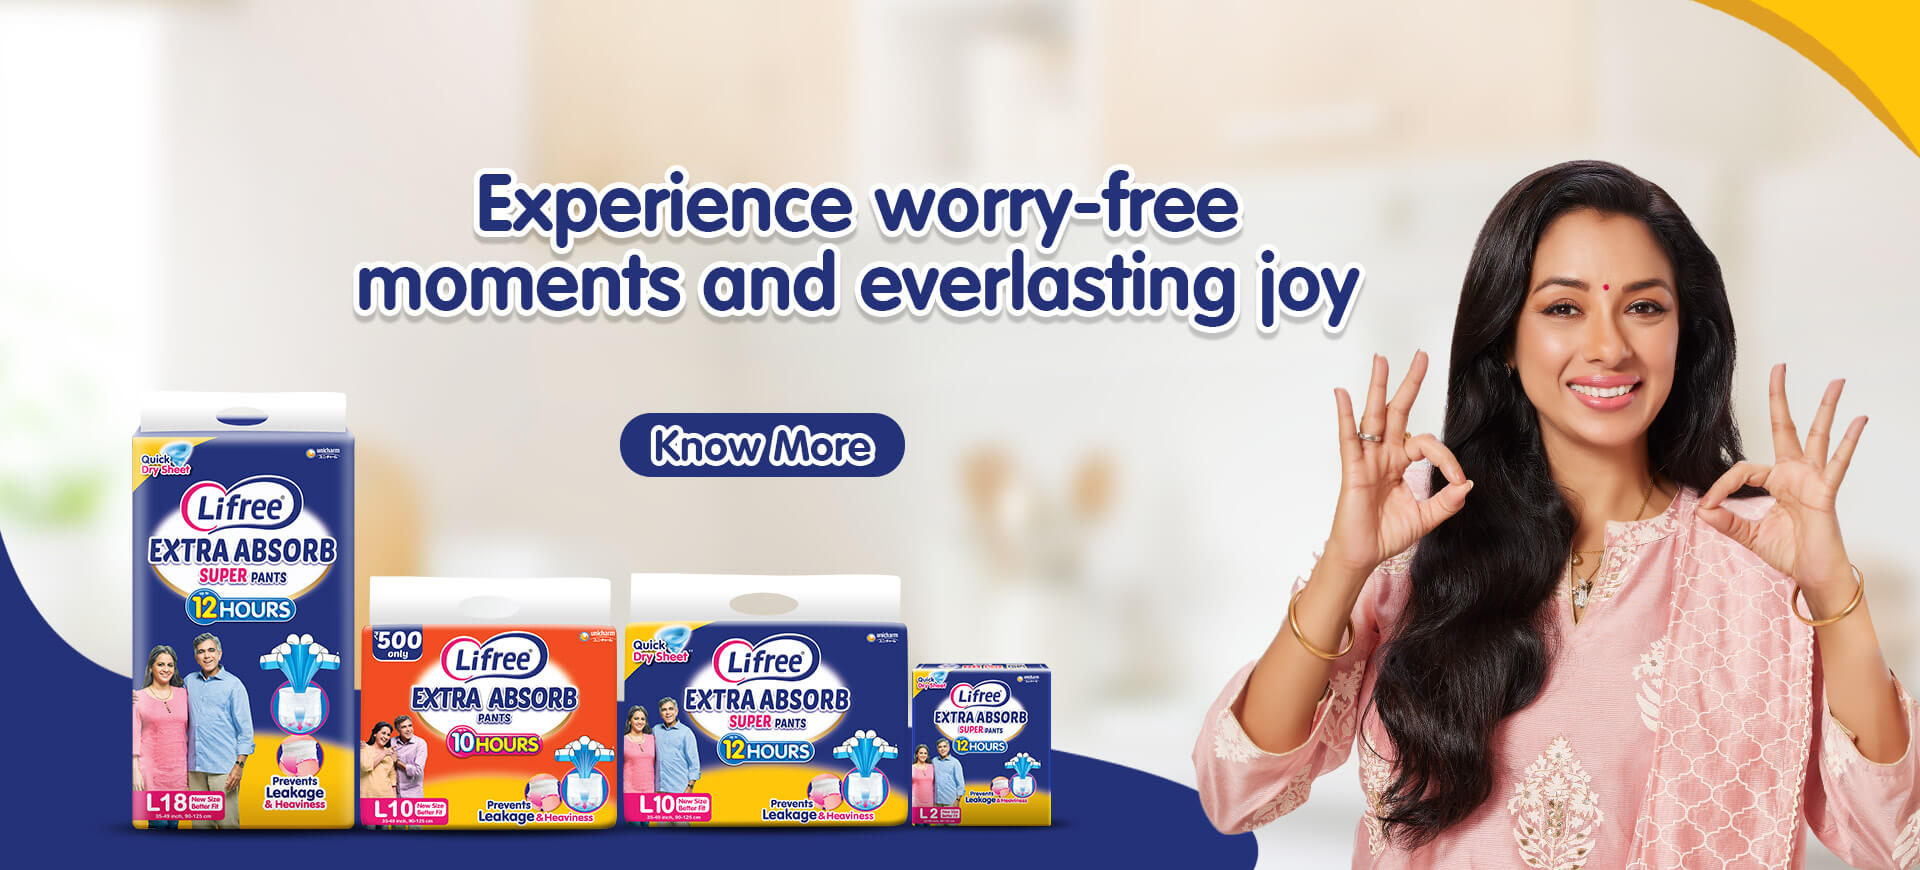 experience worry-free moments and everlasting joy